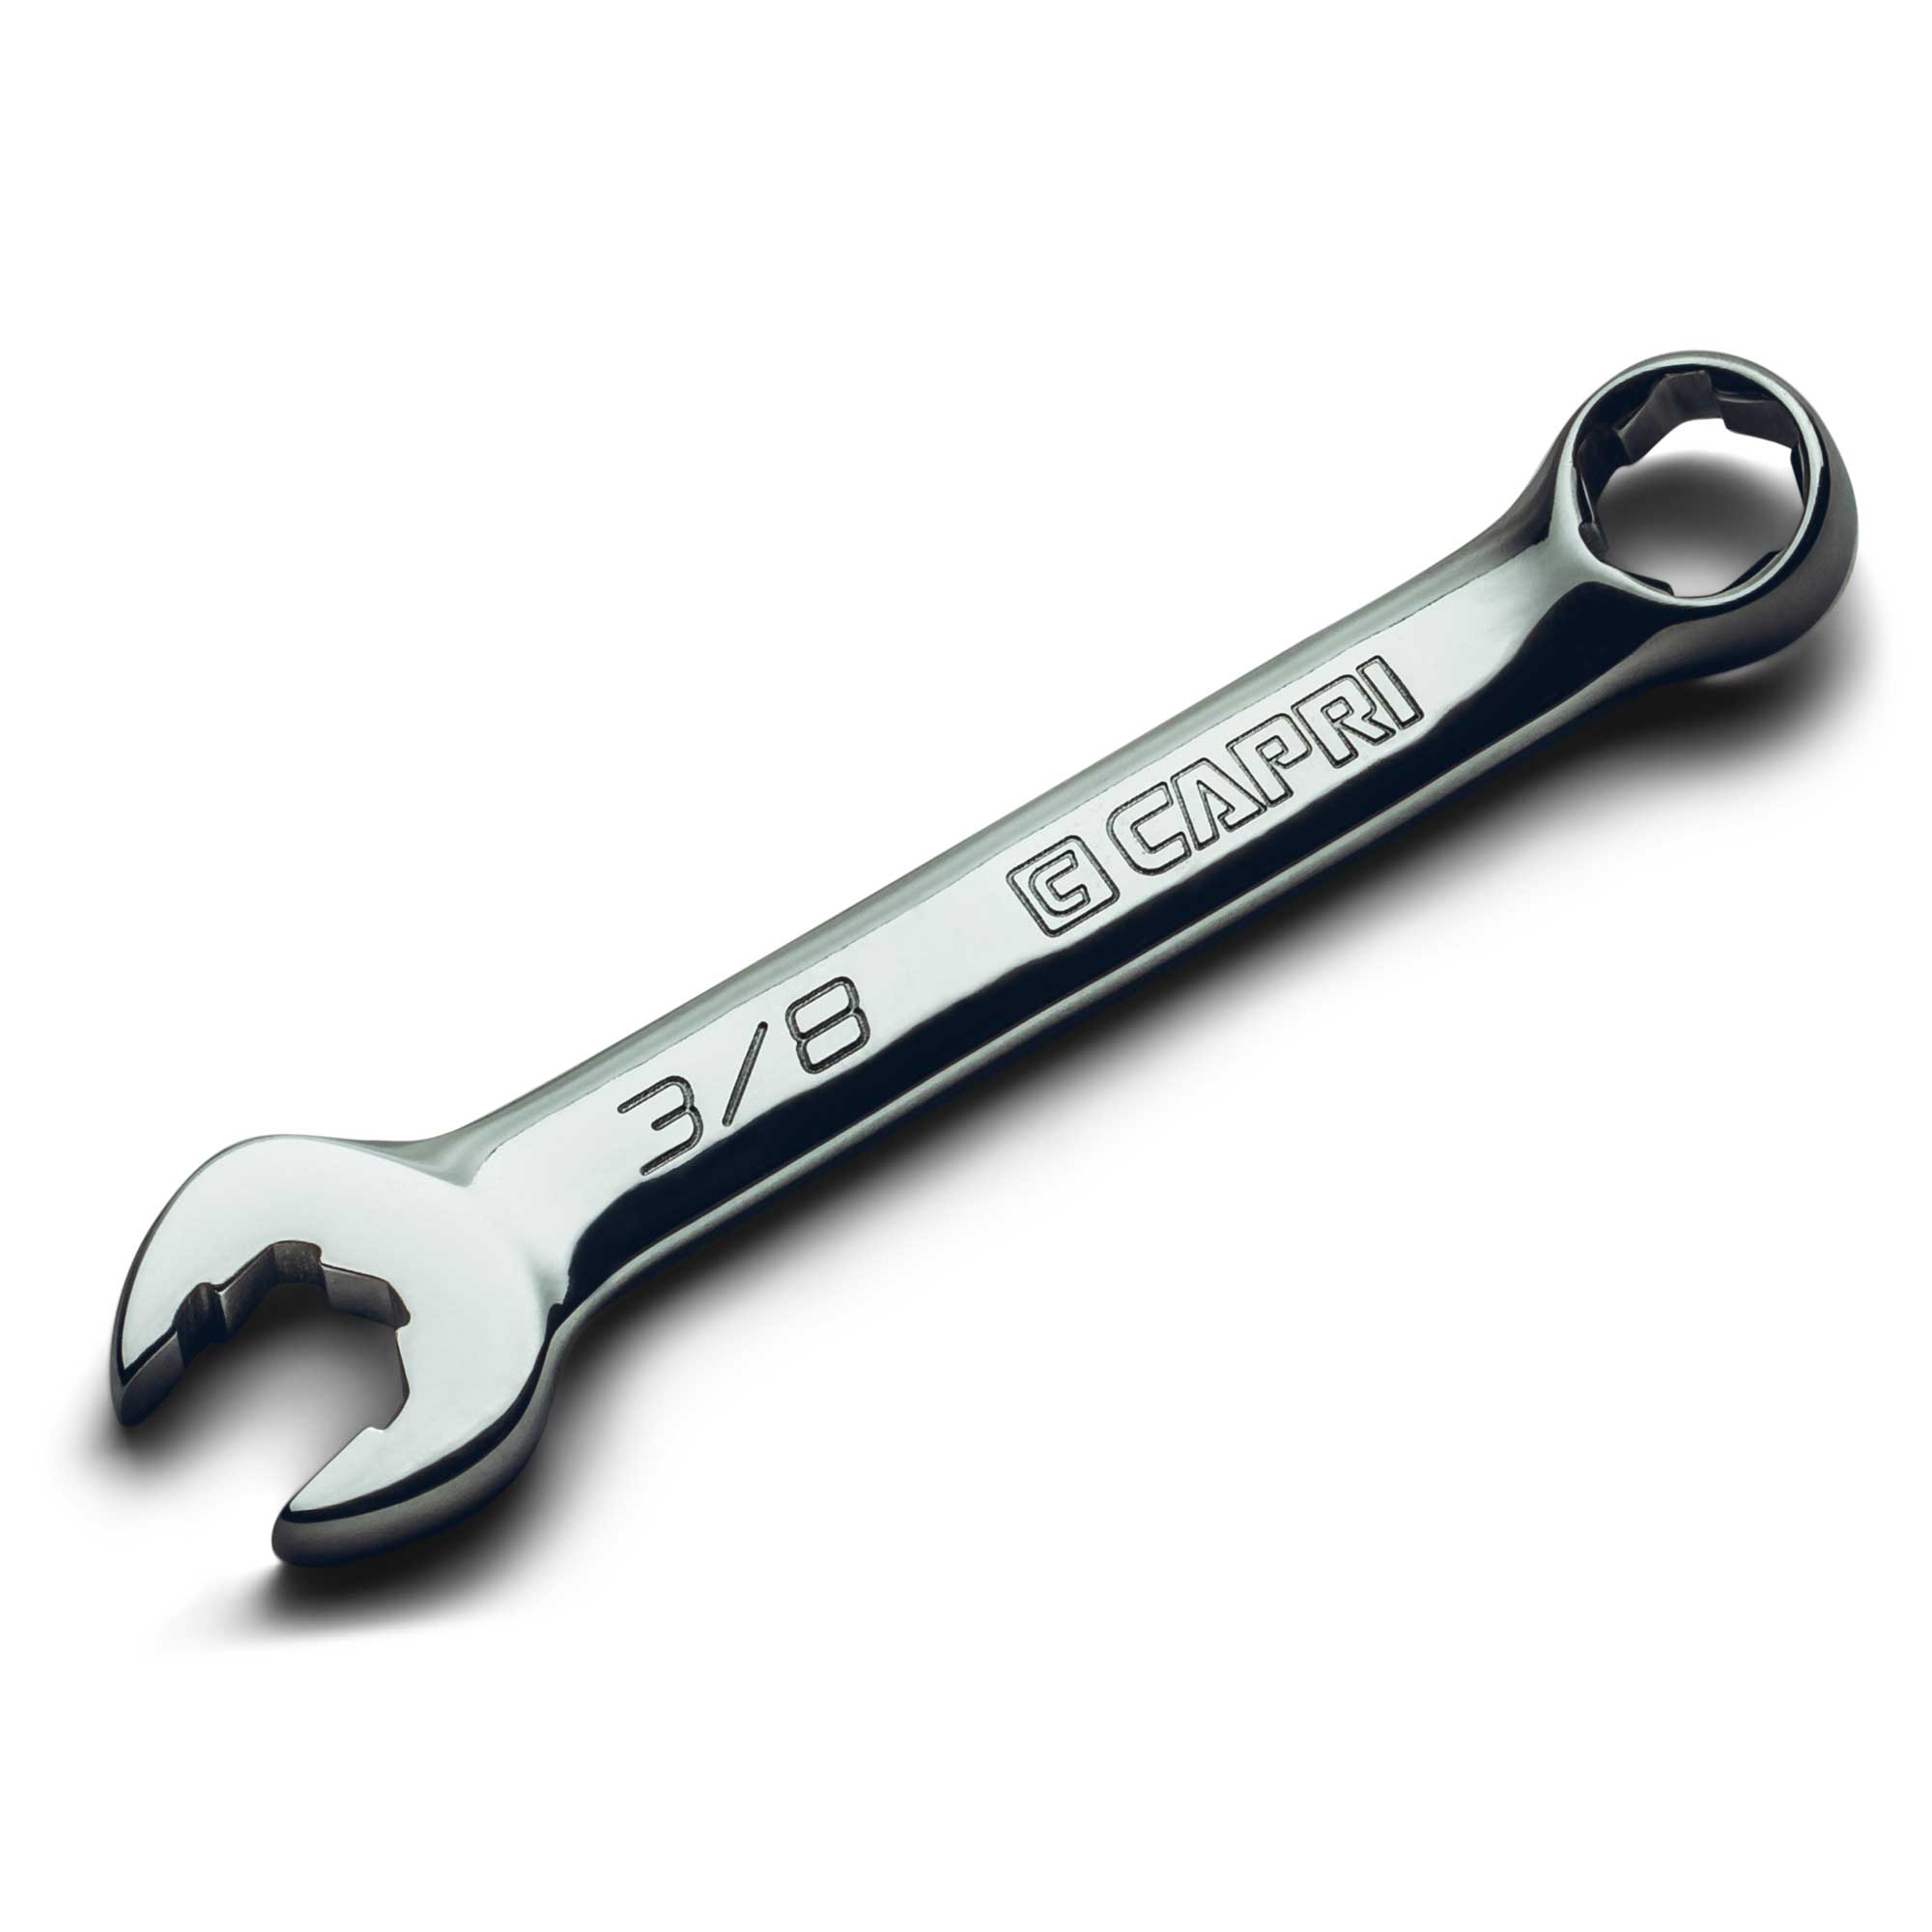 Capri Tools 3/8 in. WaveDrive Pro Stubby Combination Wrench for Regular and Rounded Bolts